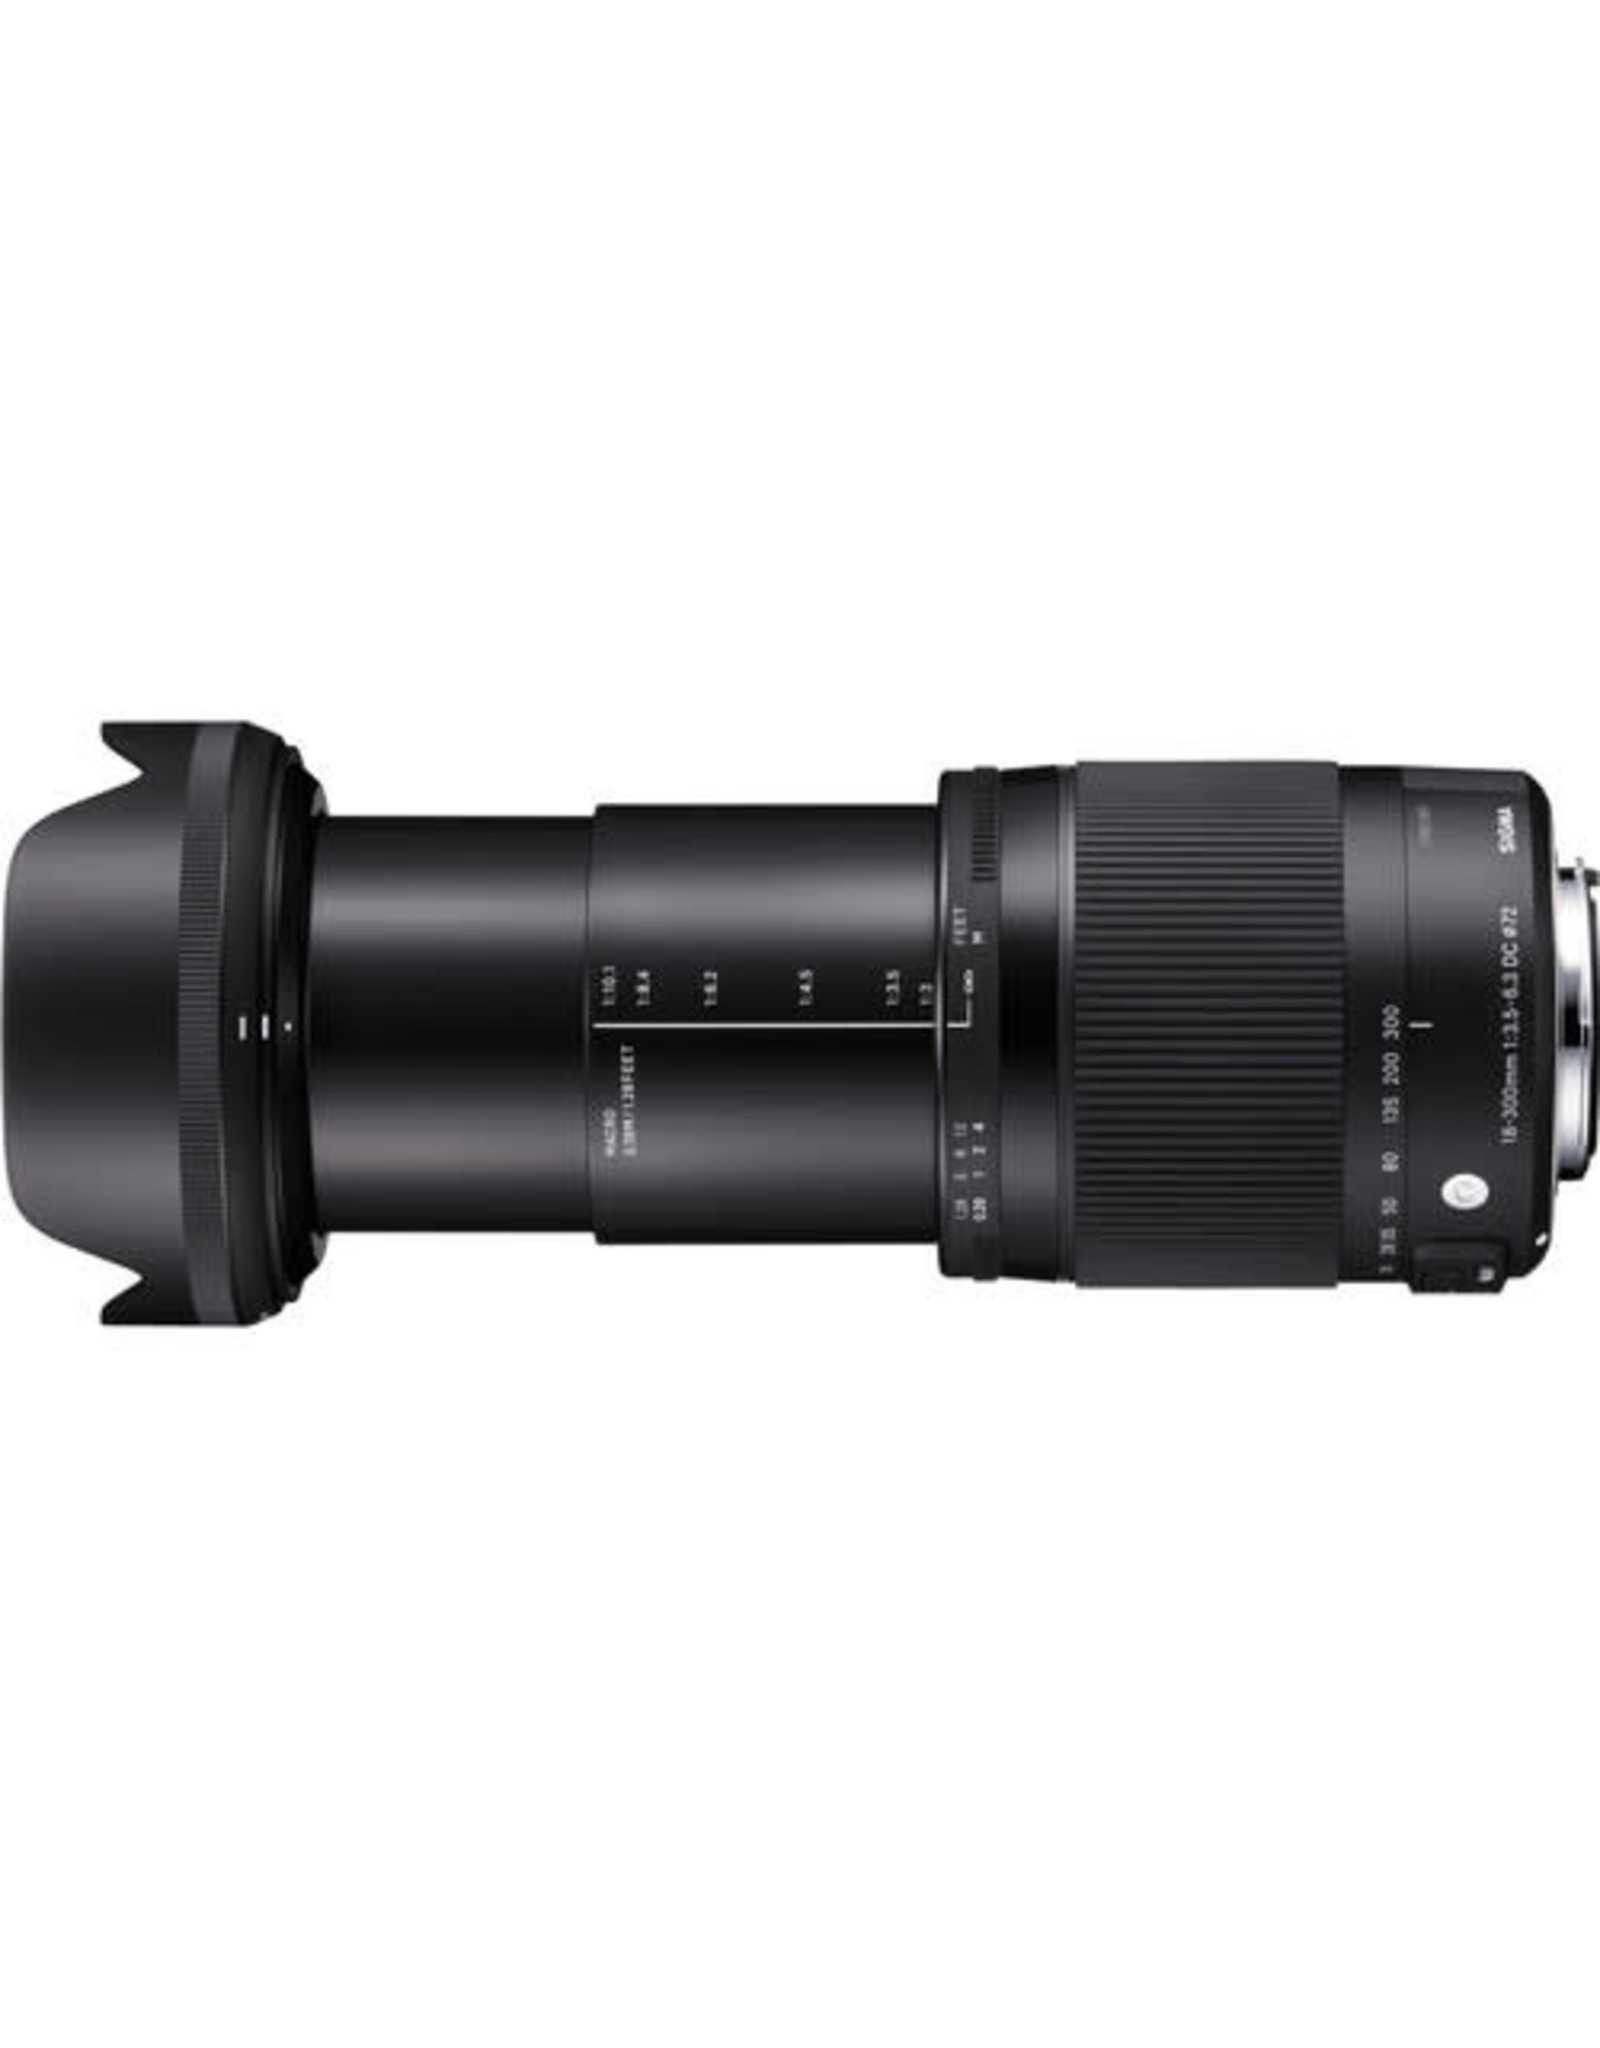 Sigma Sigma 18-300mm 3.5-6.3 Contemporary DC Macro OS HSM For Canon EF-S -DISCONTINUED